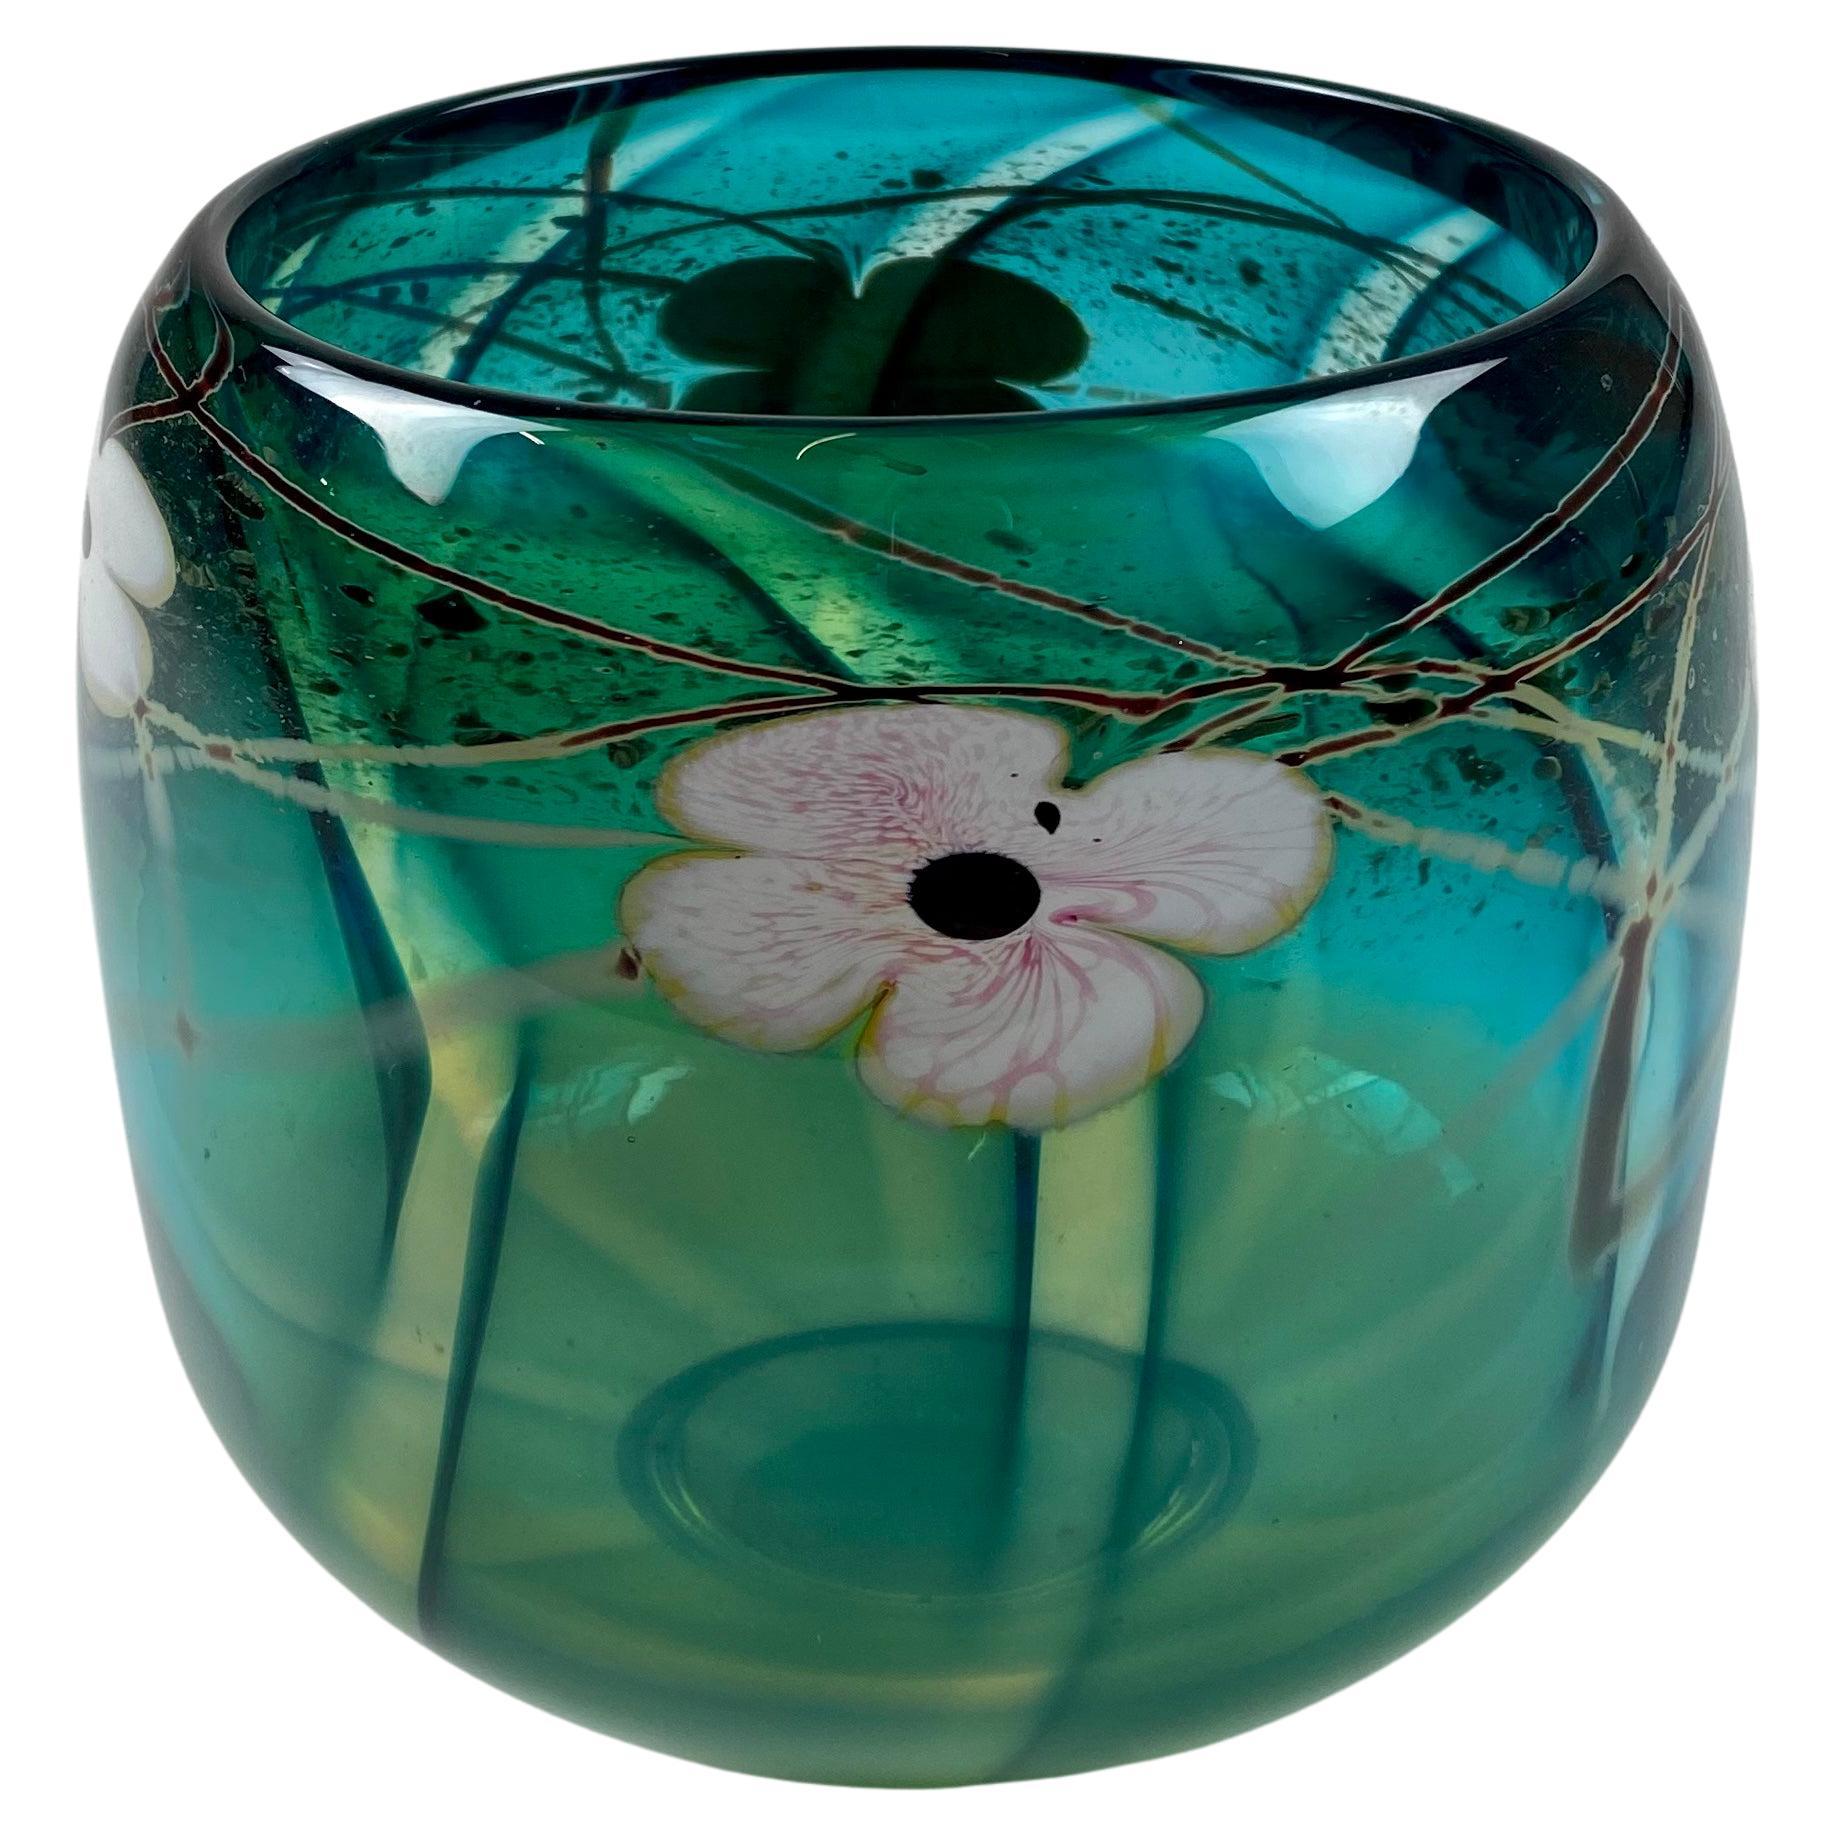 An Art Nouveau Art Deco style original David Nichols blown cased studio art glass vessel featuring white and pink dogwood blossoms in a teal ground, polished pontil. Signed at the underside. North Carolina.